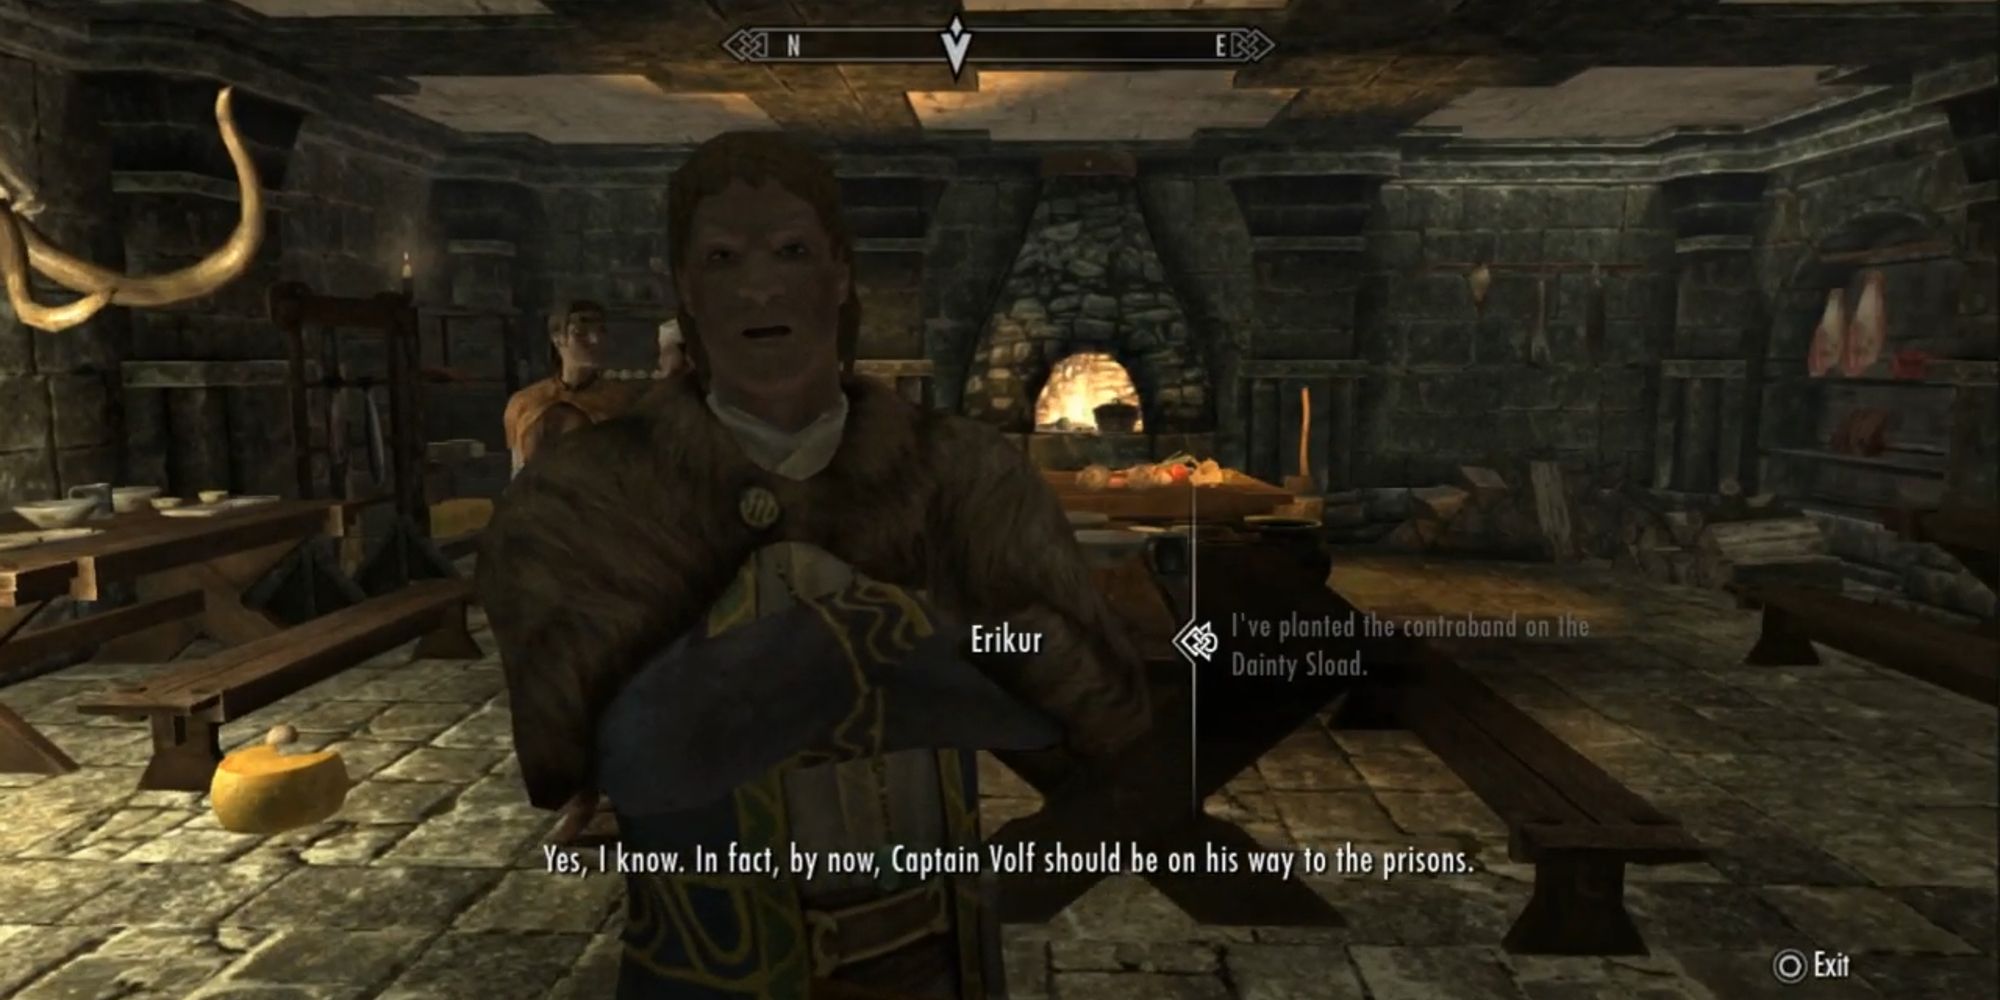 player speaking with erikur after completing the dainty sload quest